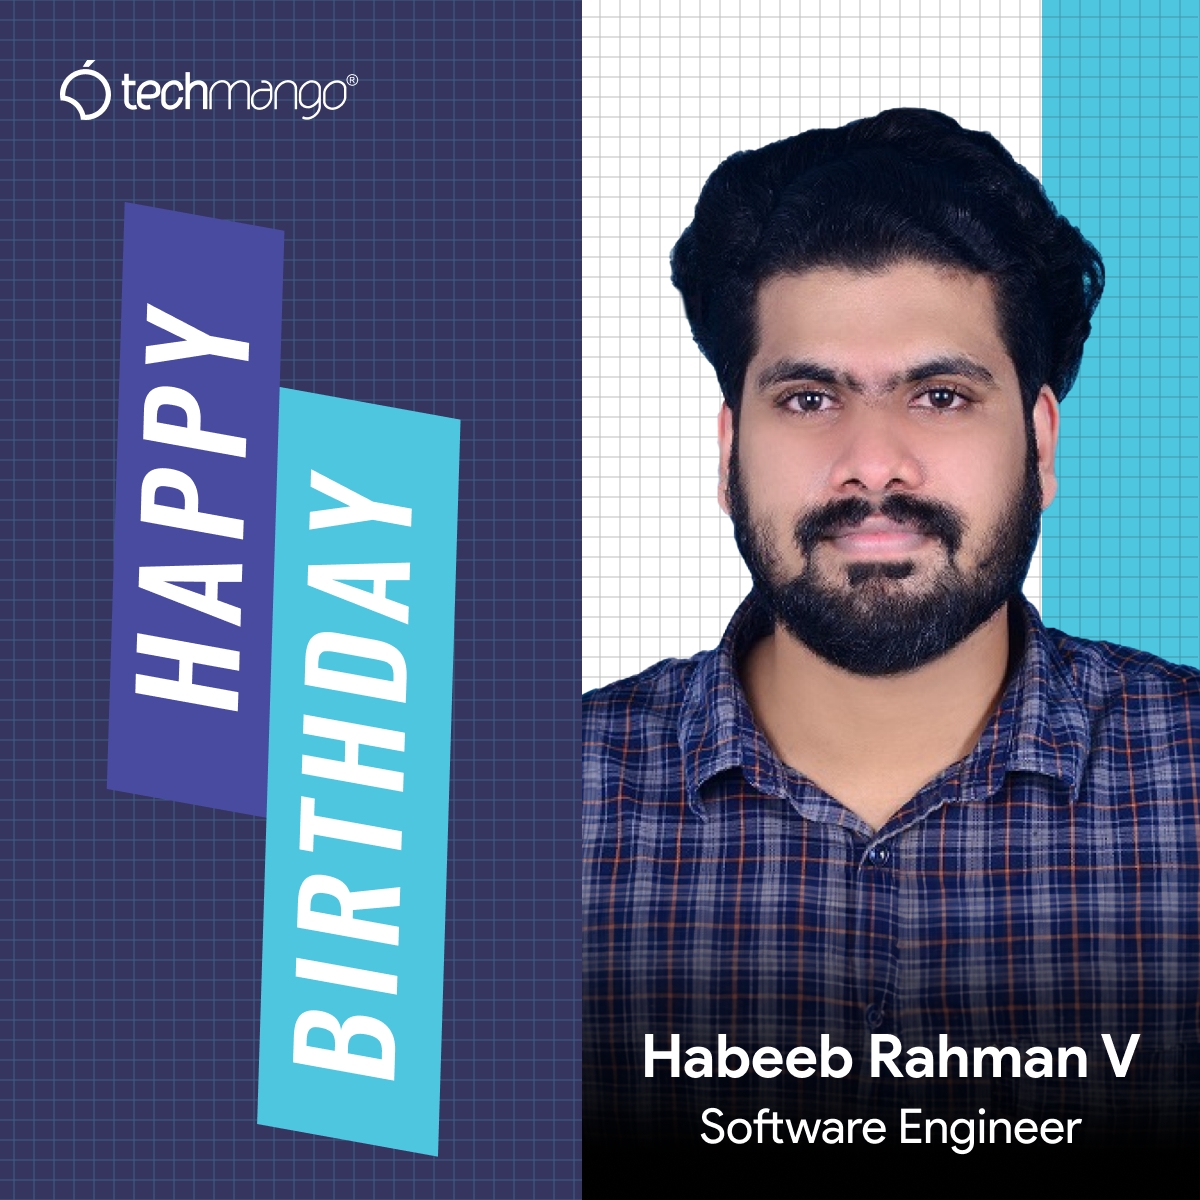 Techmango Wishes a Happy Birthday to Habeeb Rahman V Cheers to another fantastic year ahead! May this birthday be the start of your greatest, most wonderful journey yet. Have a fantastic day! #happybirthday #birthdaywishes #birthdaycelebration #birthdayparty #birthdaycheers